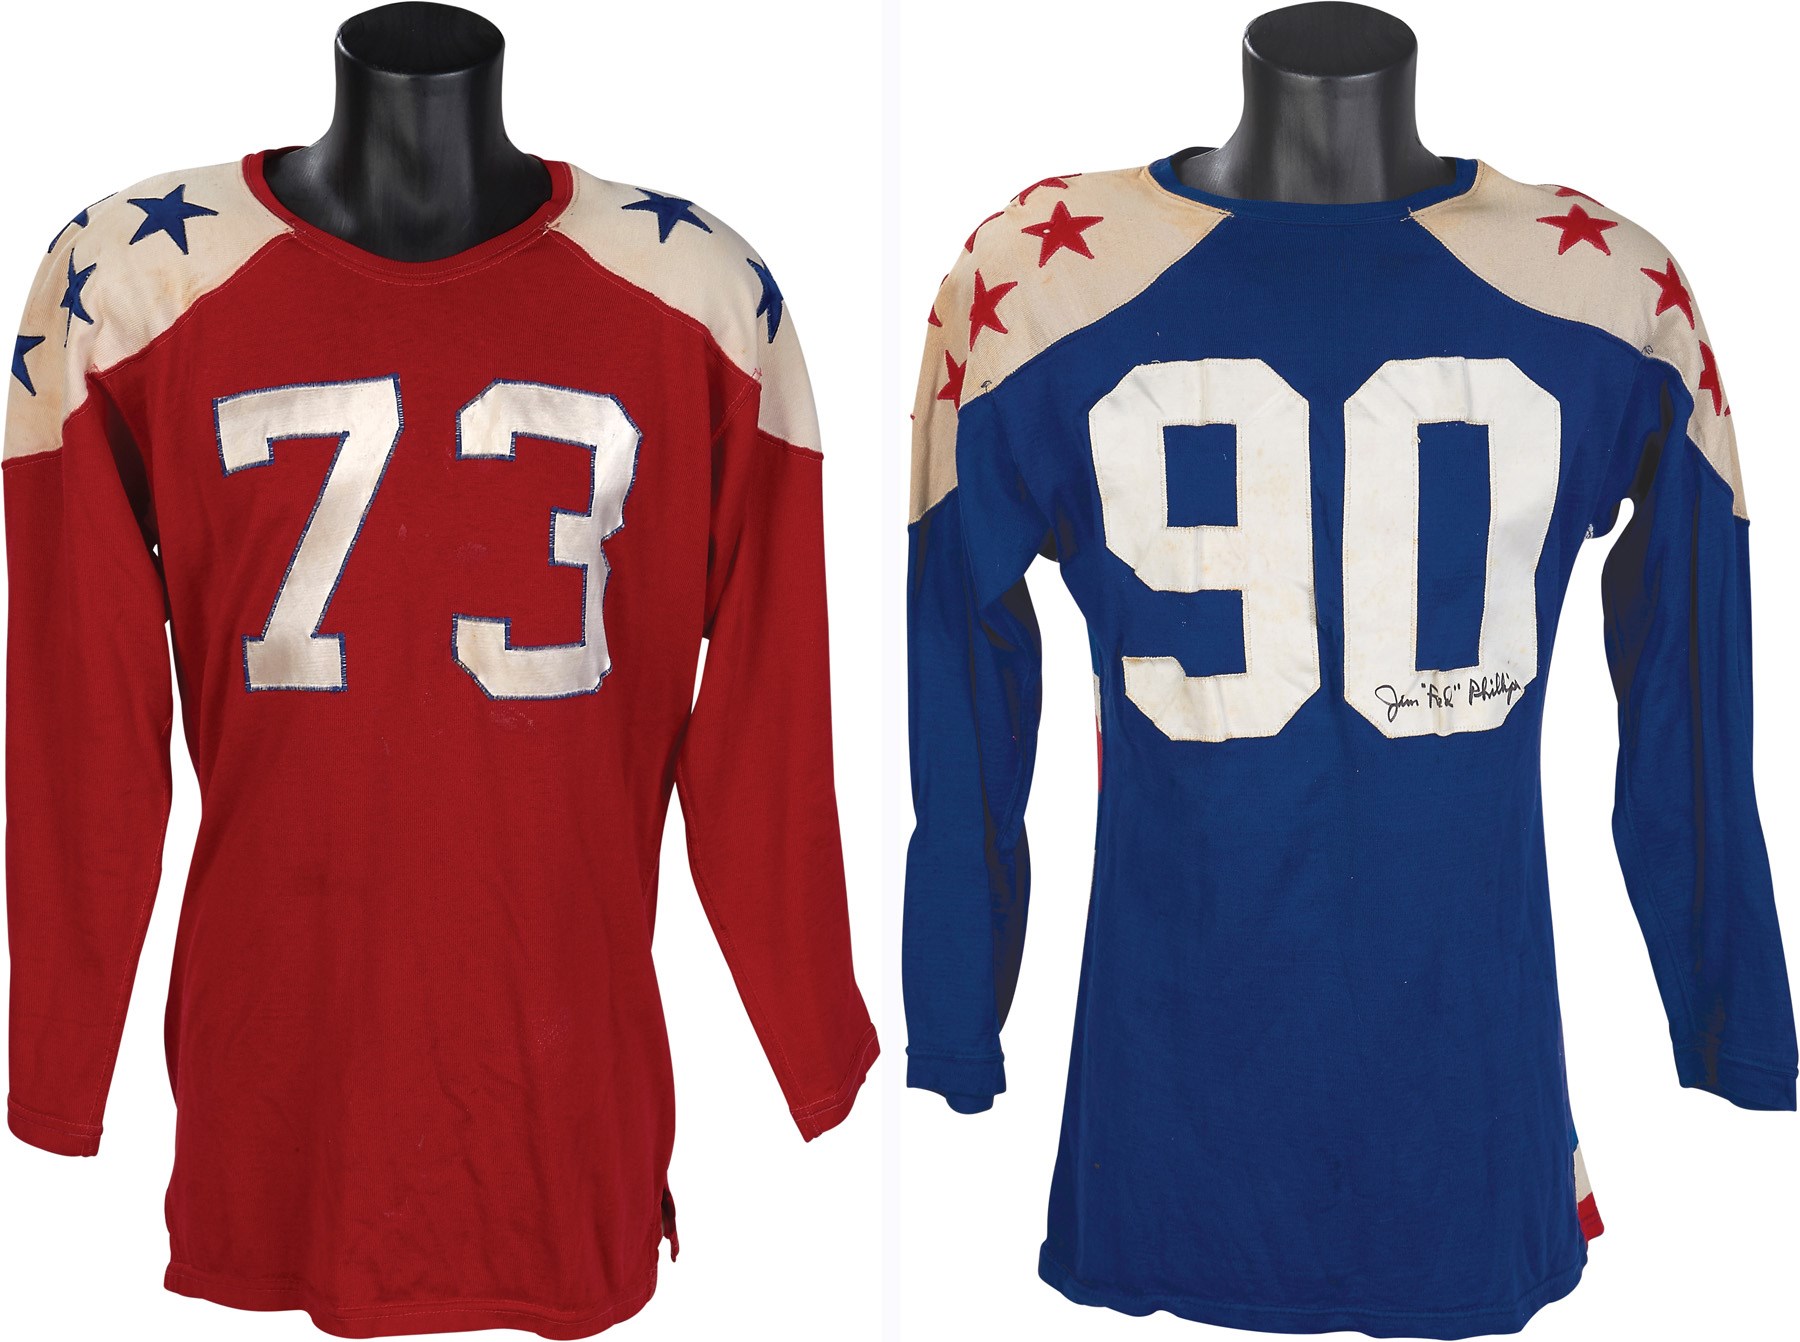 Football - 1950s Jimmy "Red" Phillips College All-Star Game Worn Jerseys (Photo Documentation)